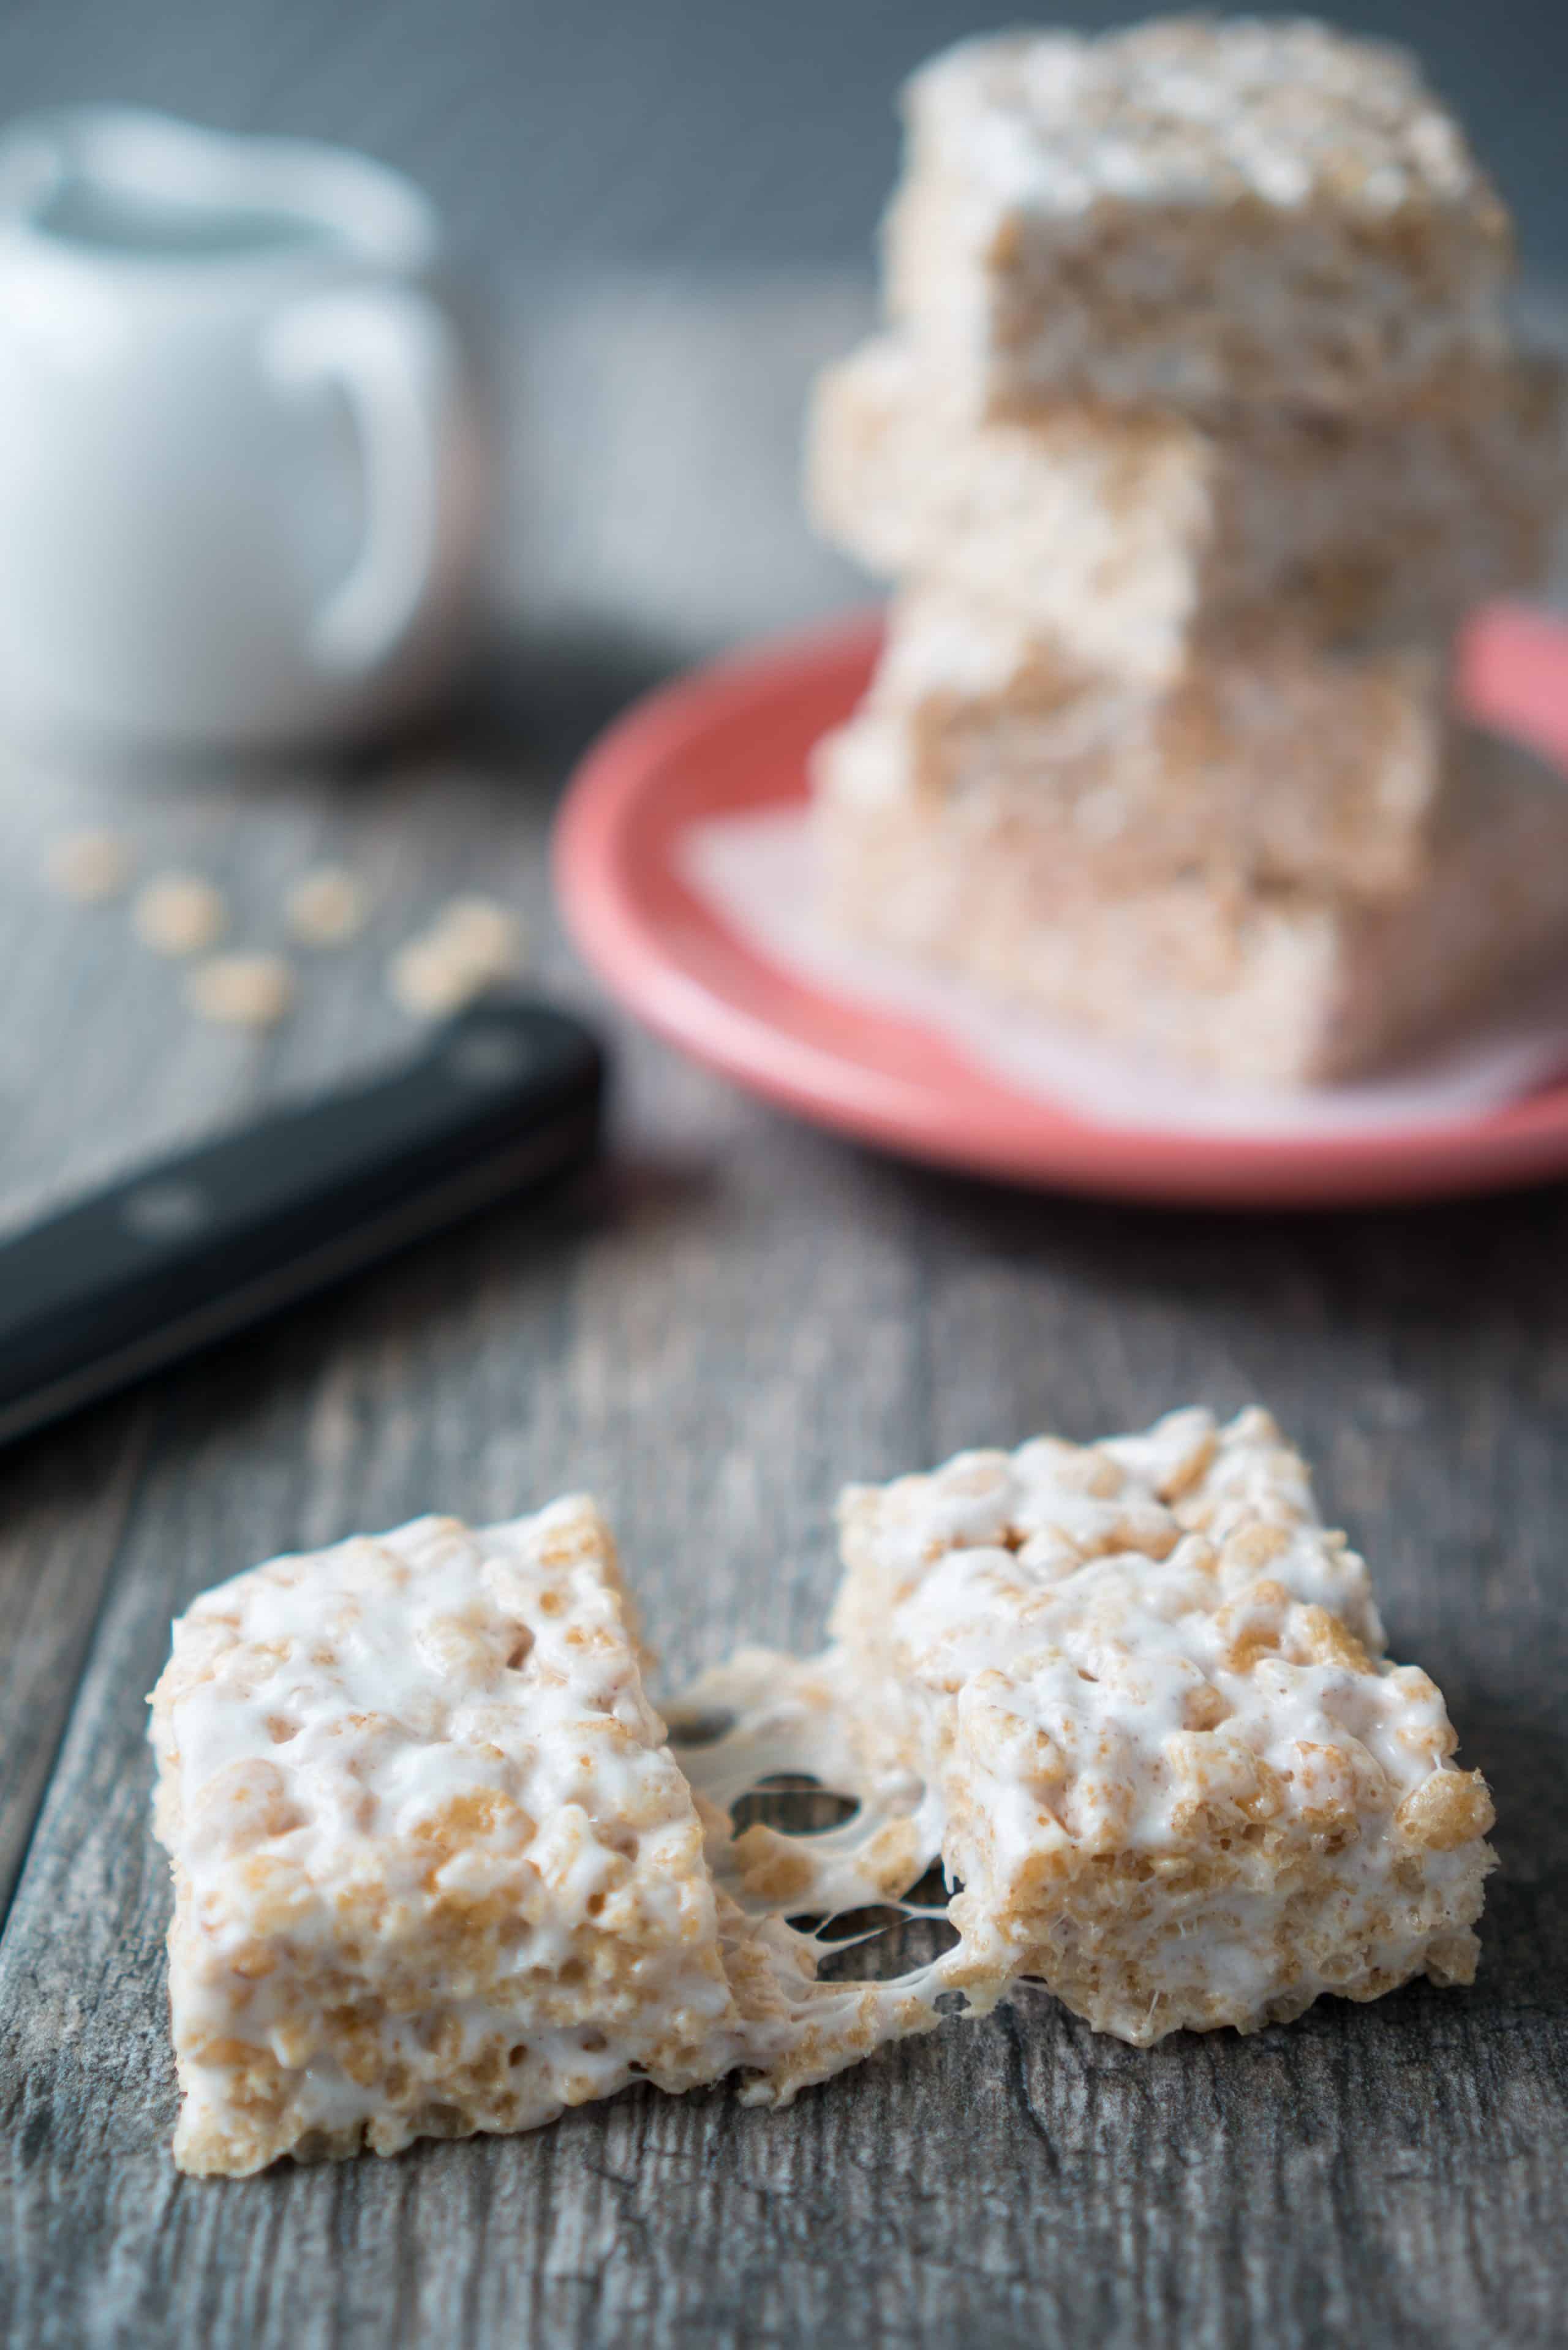 Cardamom Rice Krispie Treats – Simple recipe for Cardamom Rice Krispie Treats, gluten-free & vegan friendly. You’d never know that these use coconut oil instead of butter & brown rice cereal. A twist on the classic gooey marshmallow square with vanilla, cardamom, cinnamon, and salt! ♥ | freeyourfork.com